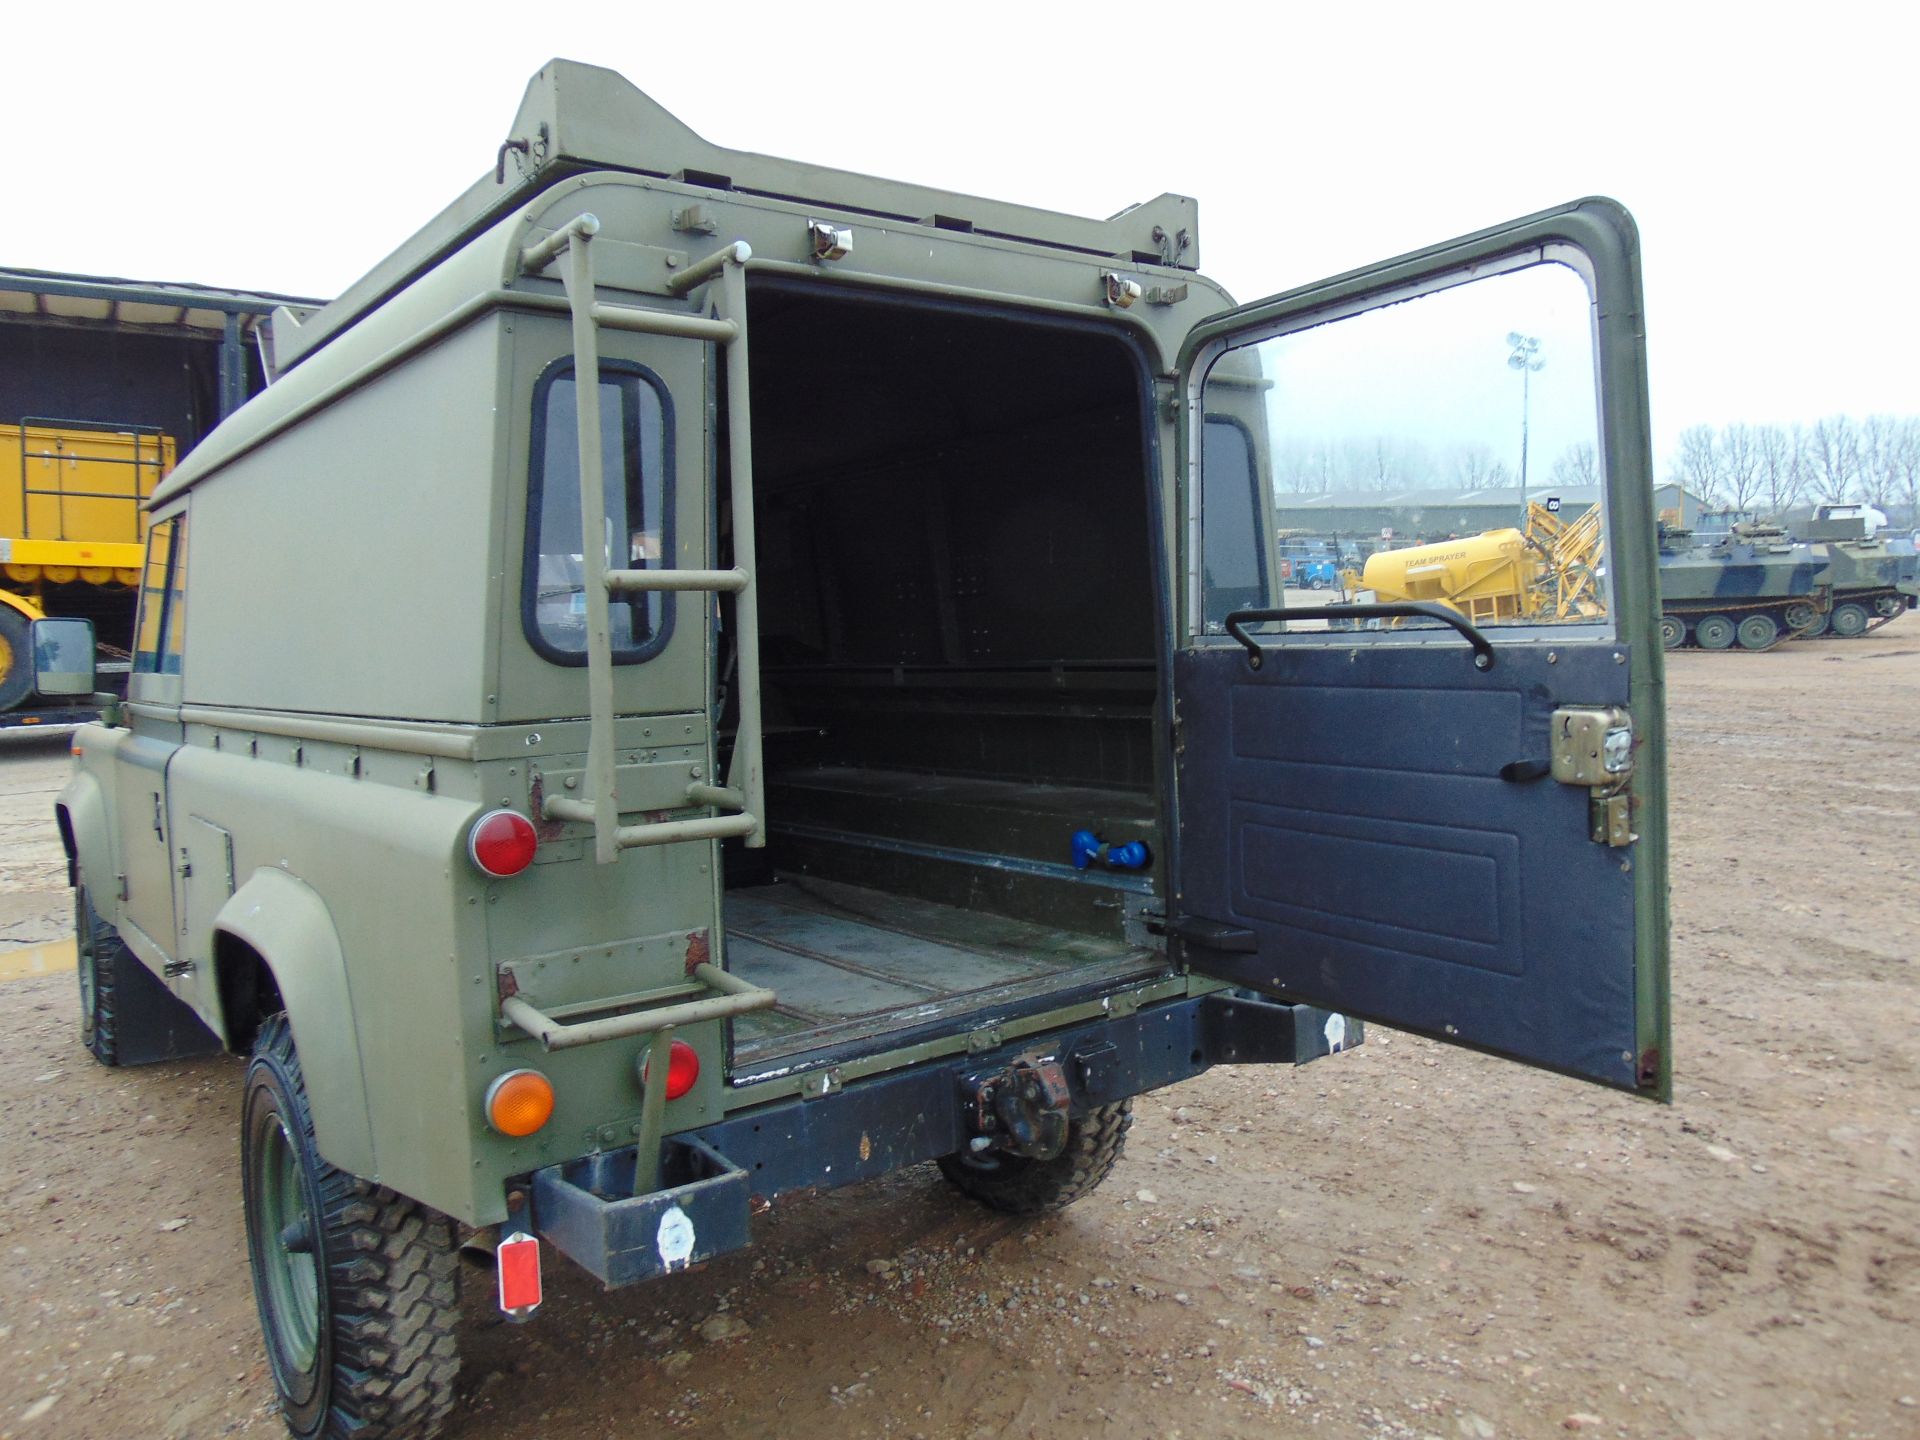 Ultra Rare Helisupport Land Rover 110 Hard Top - Image 13 of 23